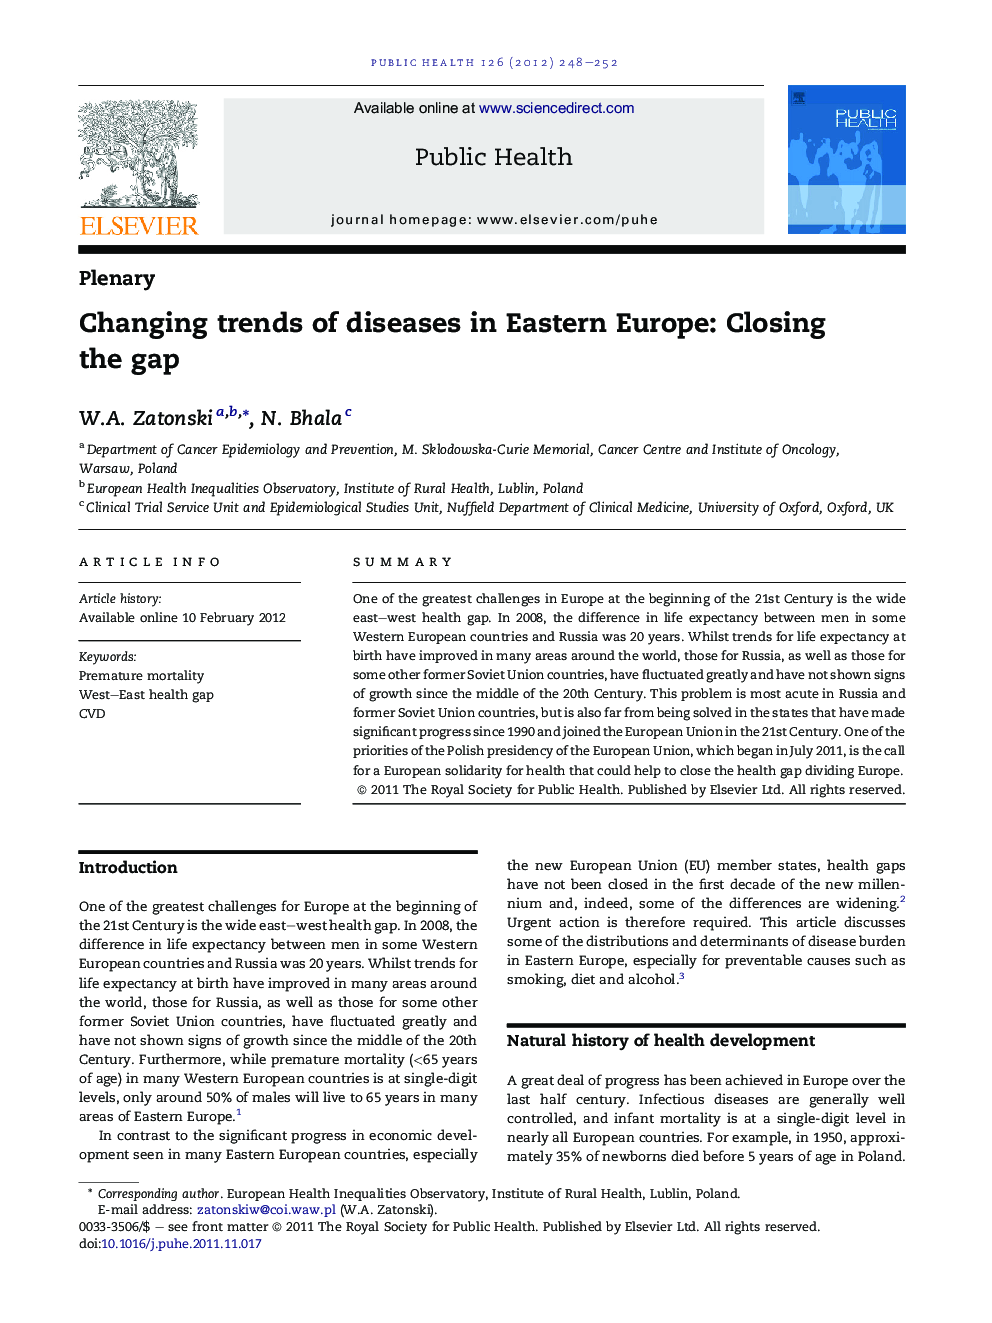 Changing trends of diseases in Eastern Europe: Closing the gap